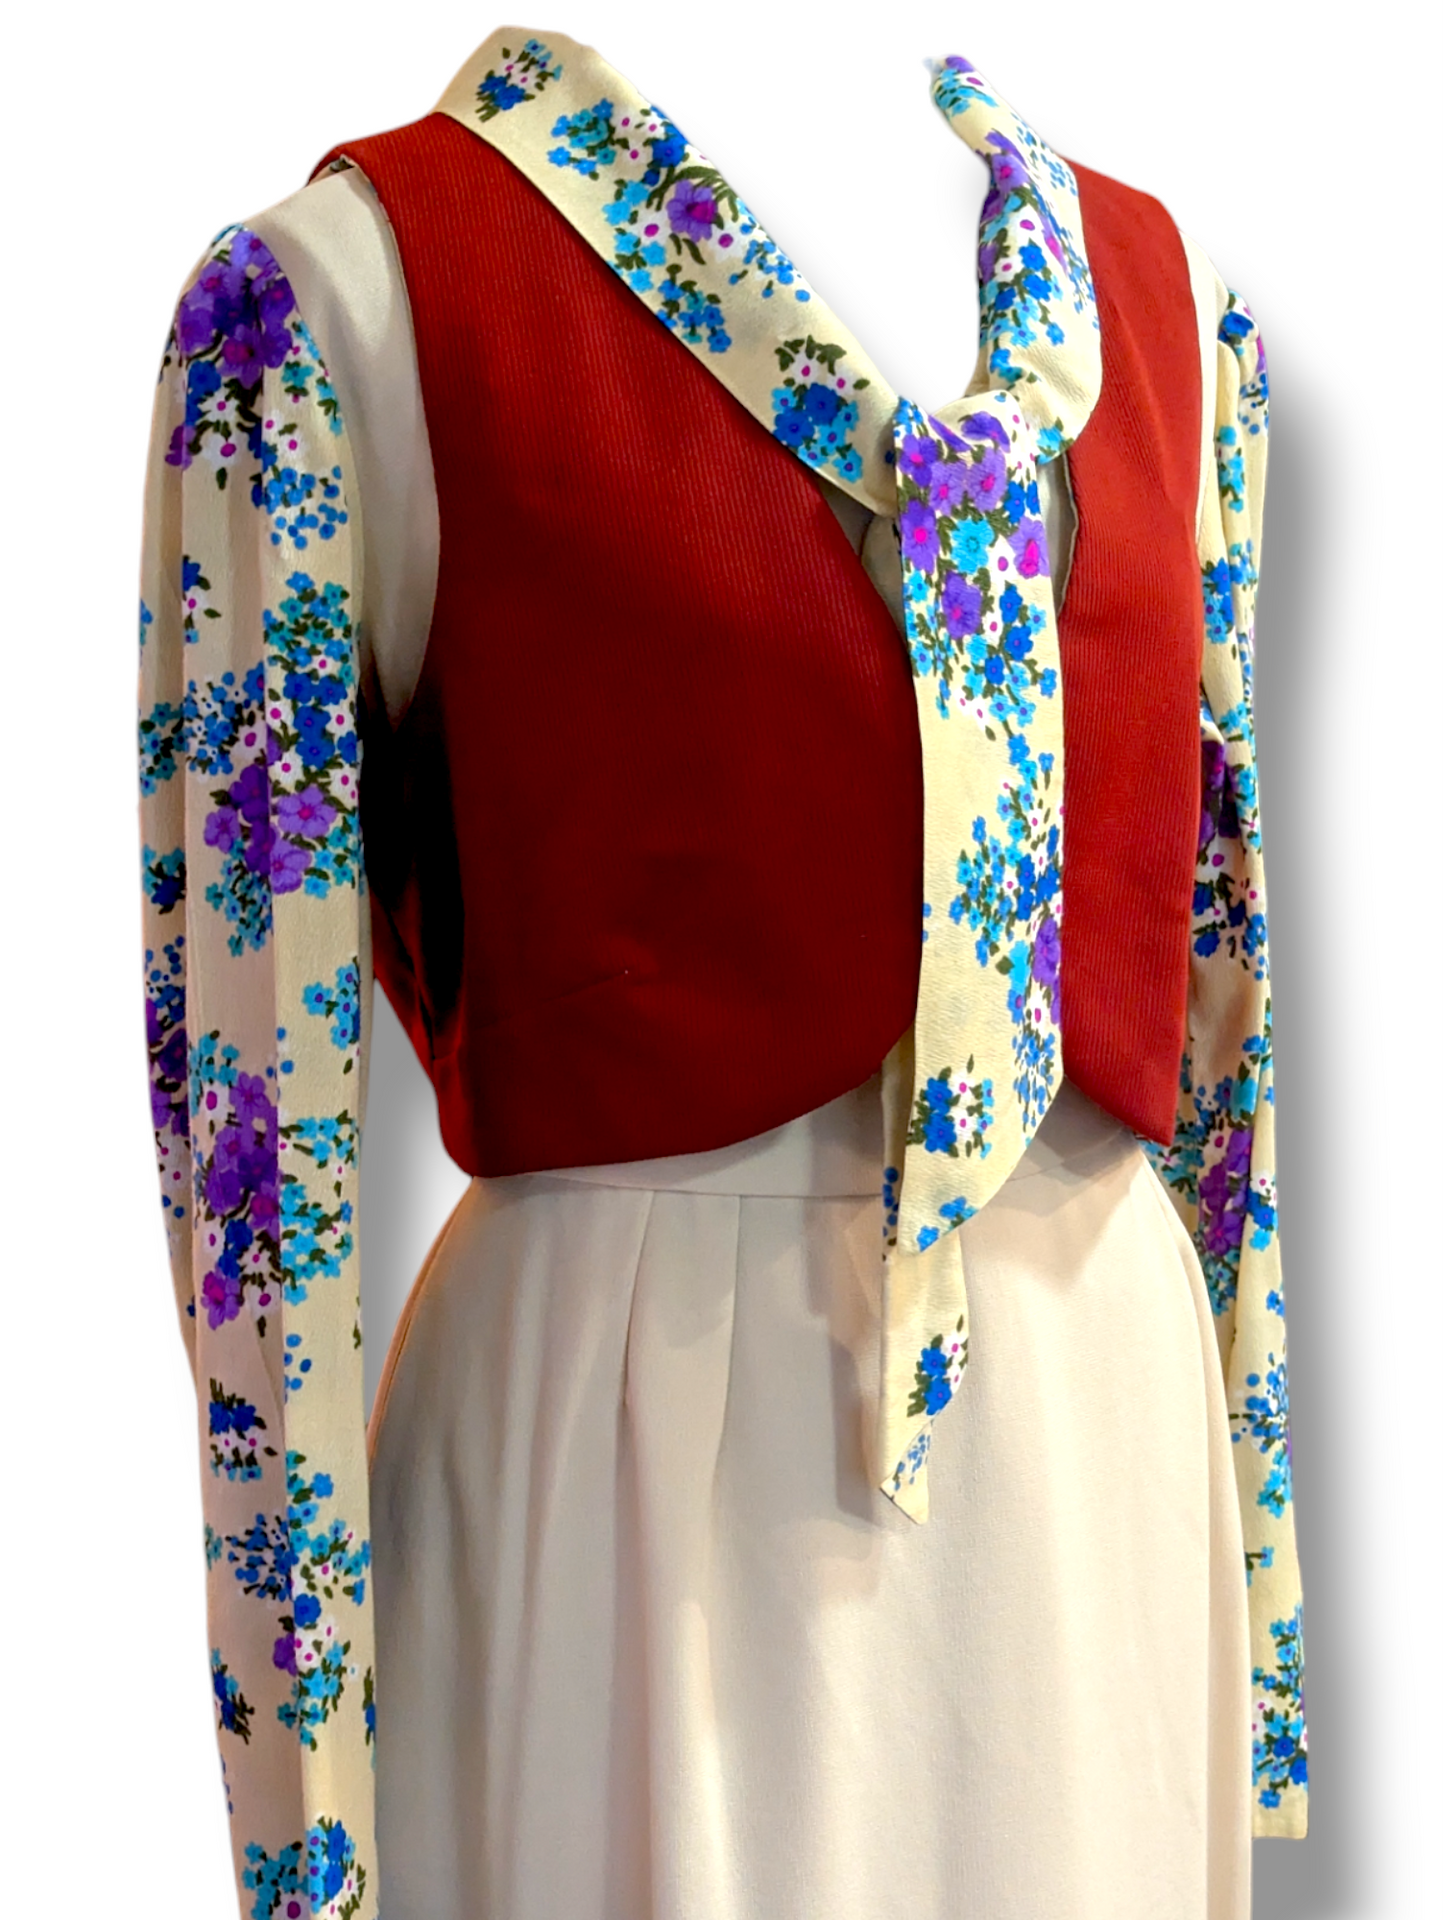 1970s 3 Piece Matching Tan and Floral Blouse, Skirt and Reversible Vest with Pockets!